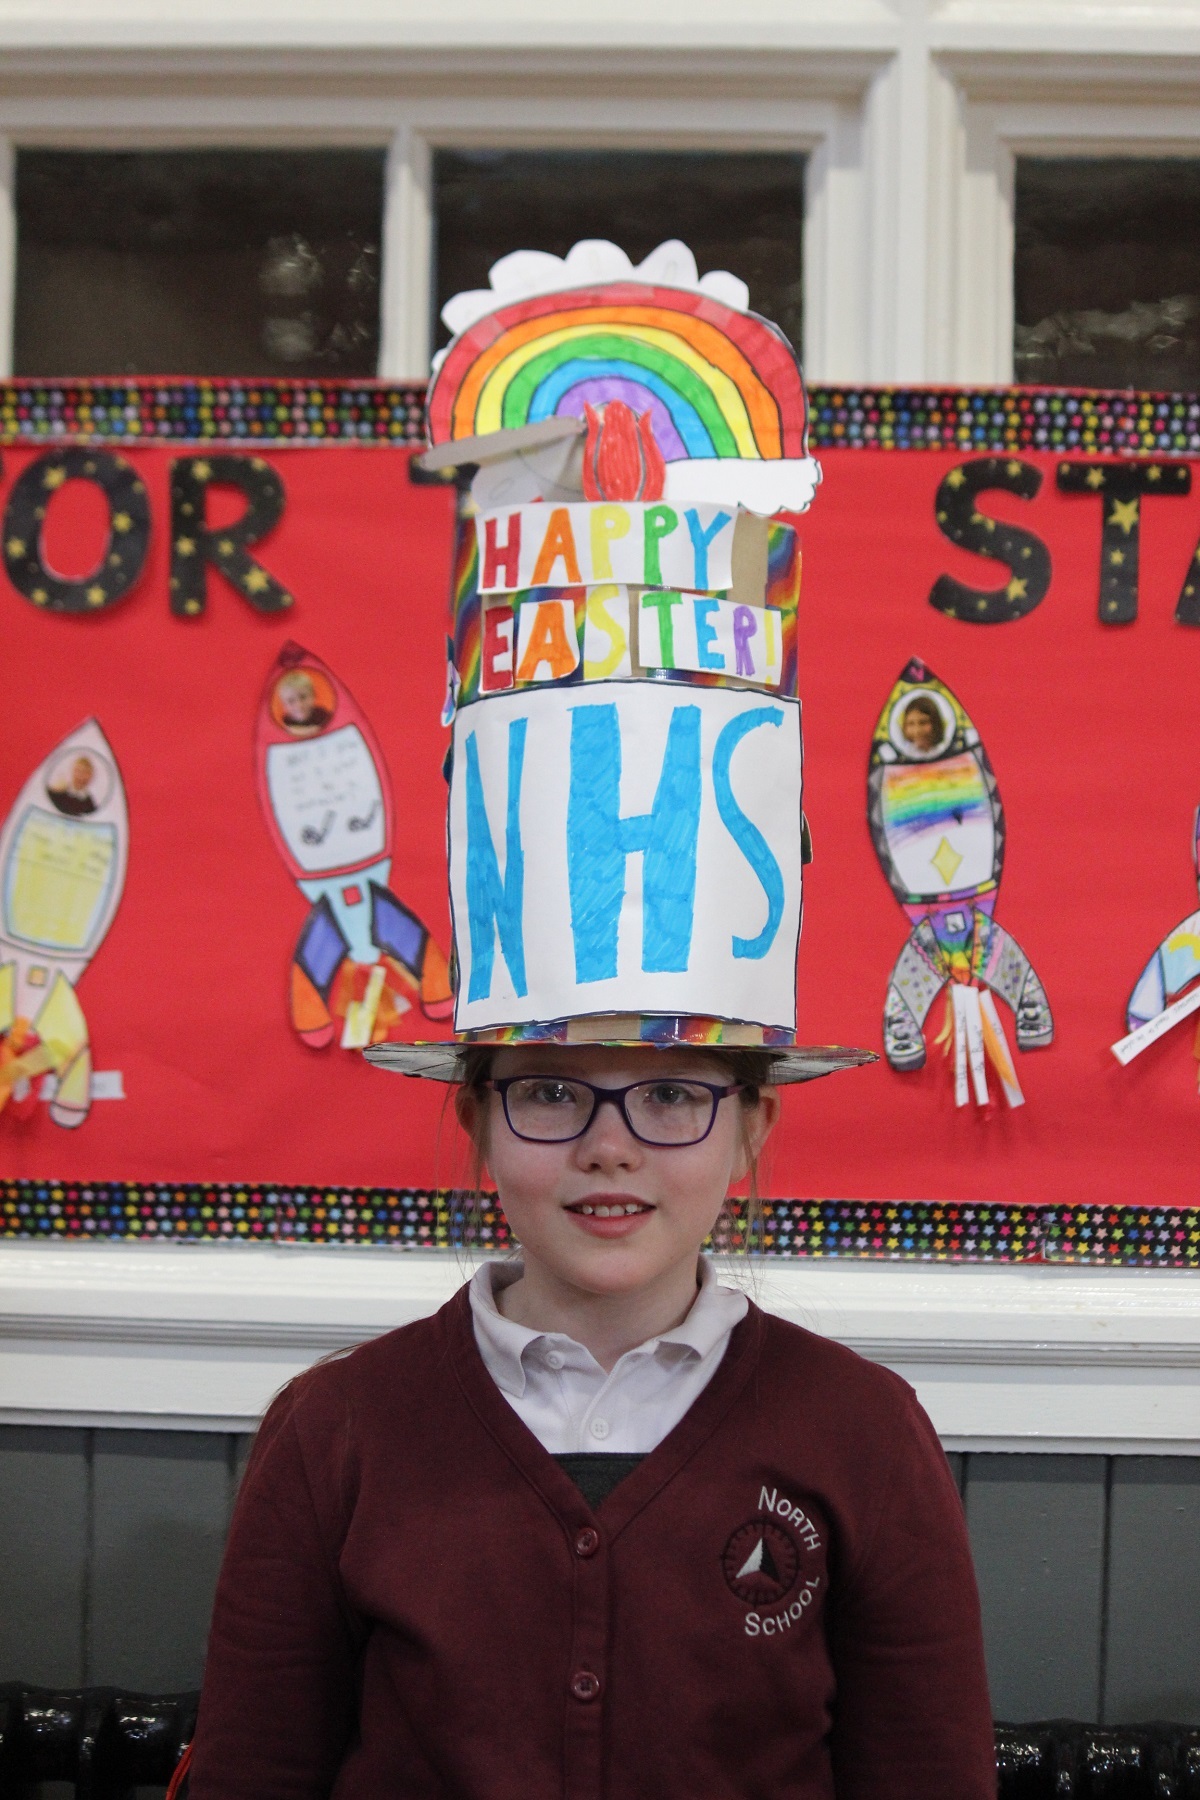 Amber Szabos easter bonnet ( her mum works for the NHS).